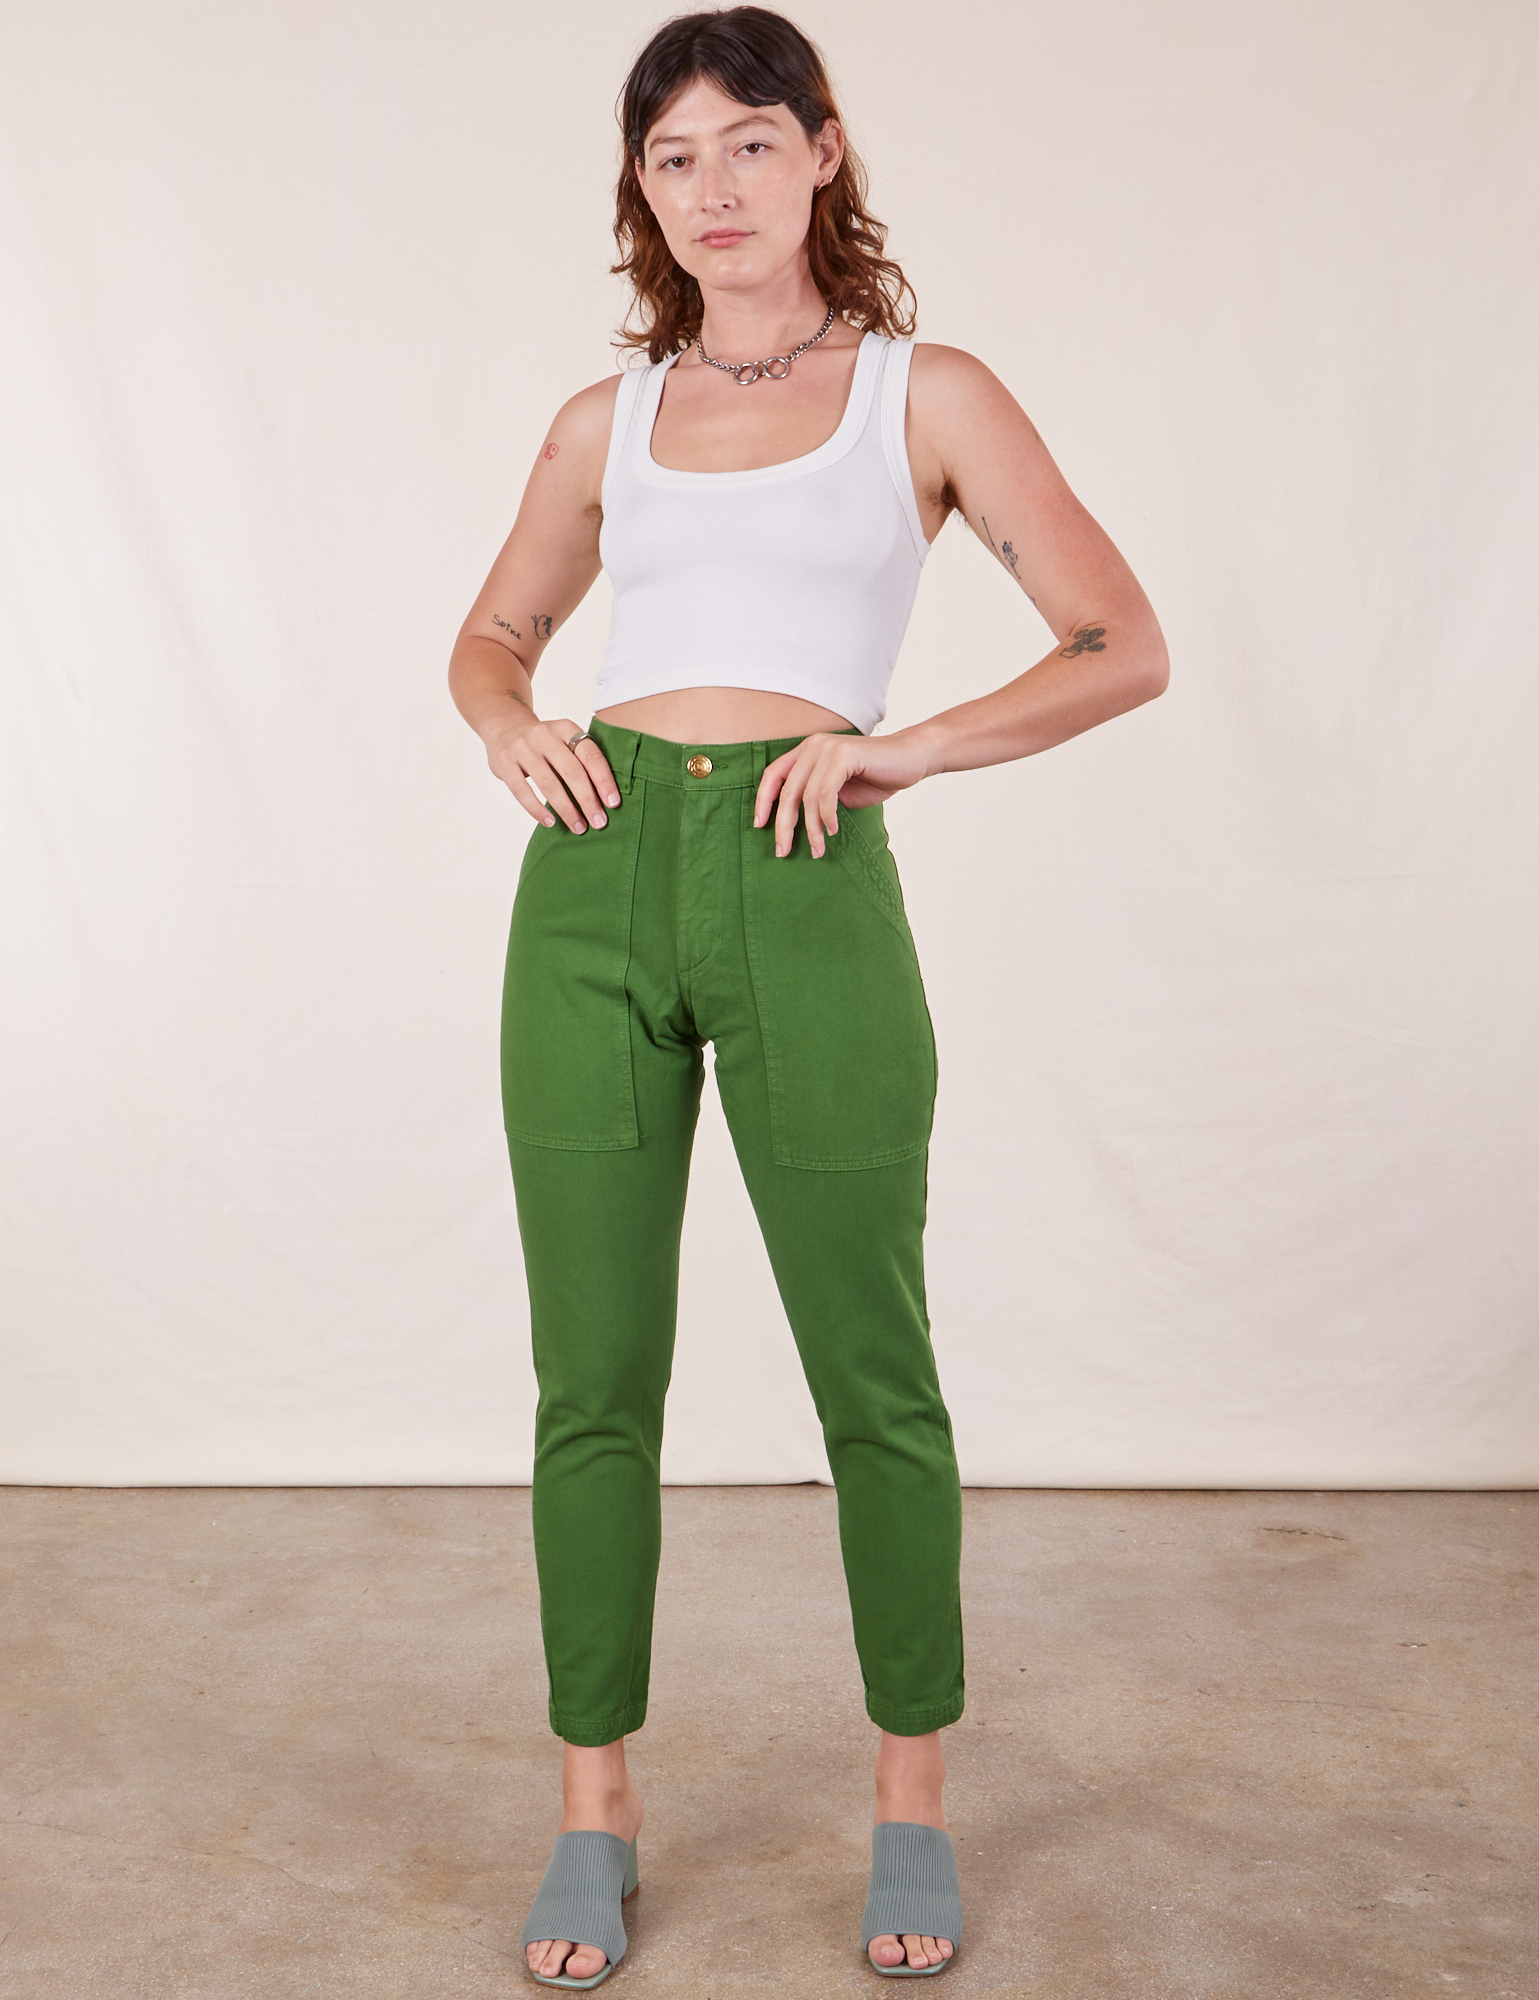 Alex is wearing Pencil Pants in Lawn Green and vintage off-white Cropped Tank Top